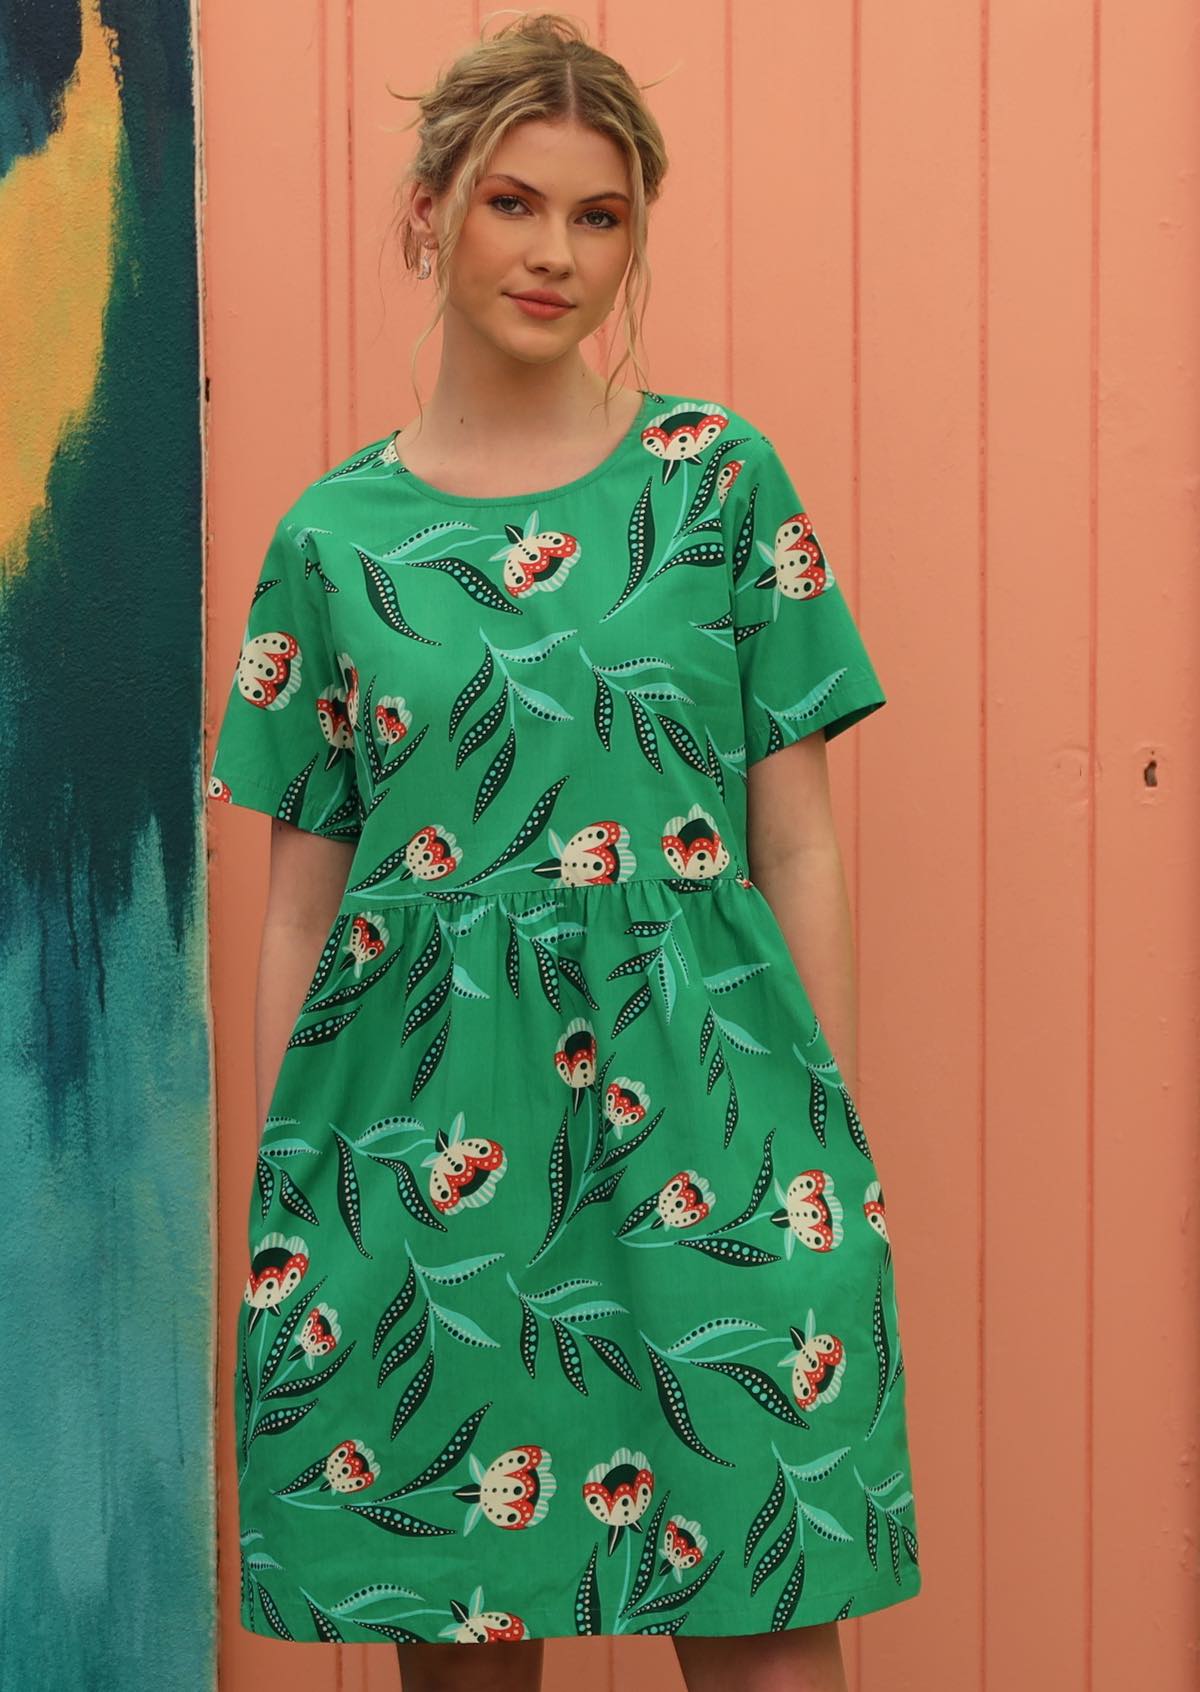 Model wears green cotton dress with T-shirt sleeves